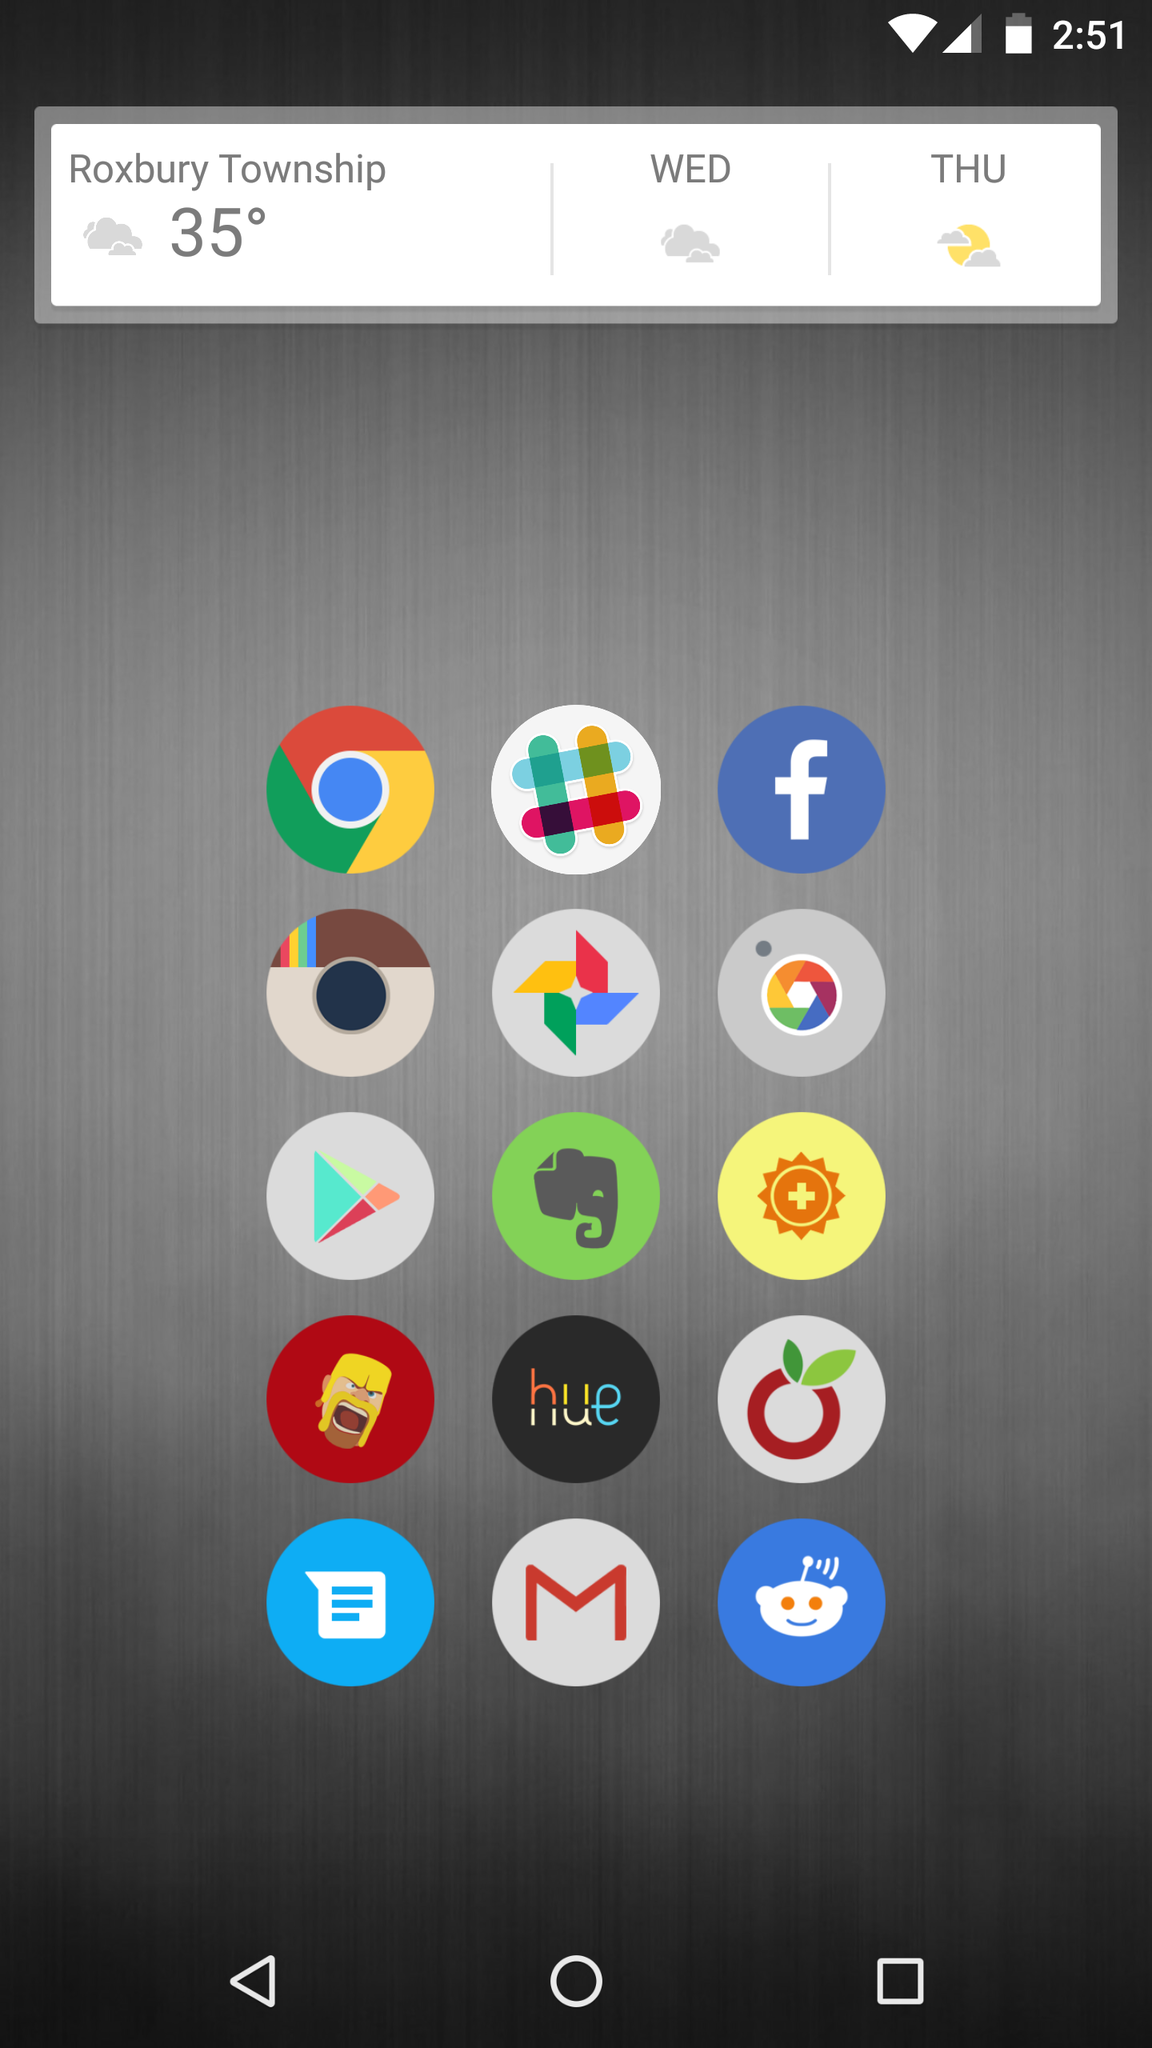 A Simple Background, A Simple Grid Of Apps, And A Well-places - Android Icon Layout - HD Wallpaper 